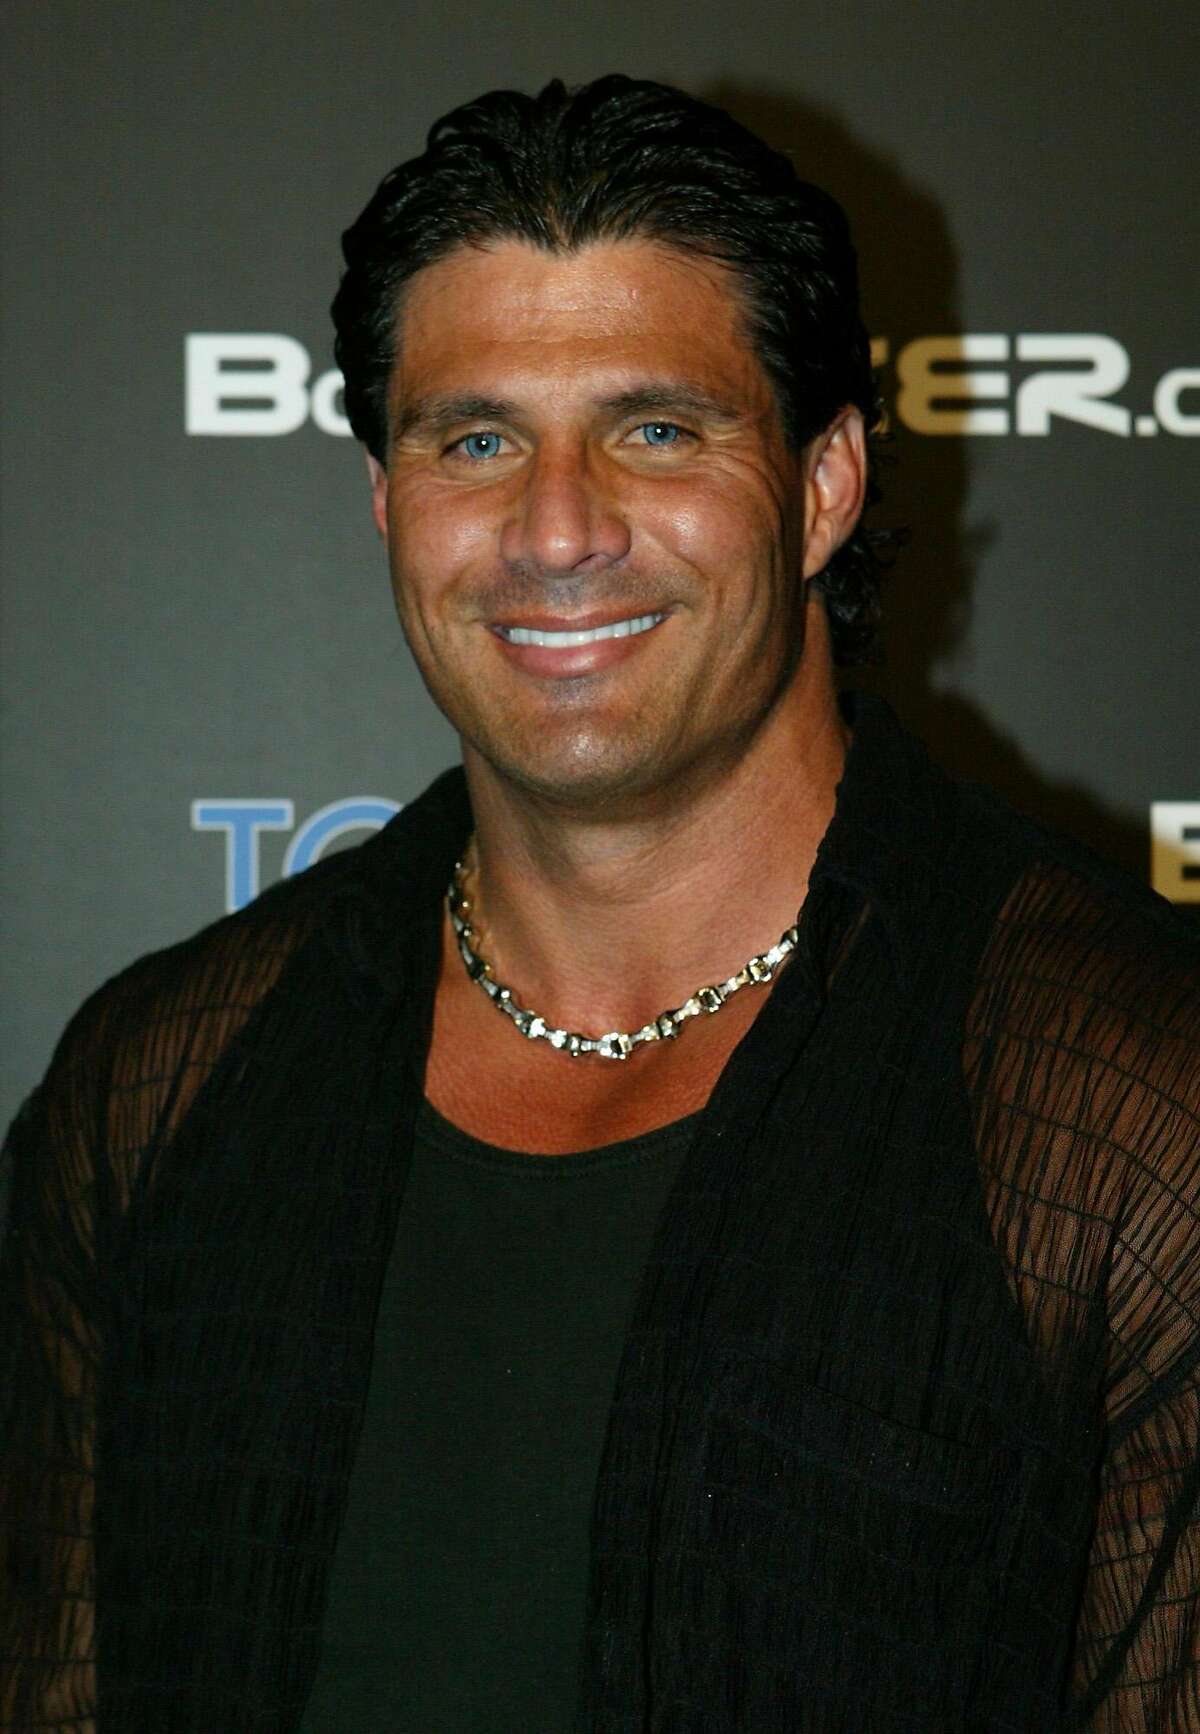 Jose Canseco will return to play for the Pittsburg Diamonds in